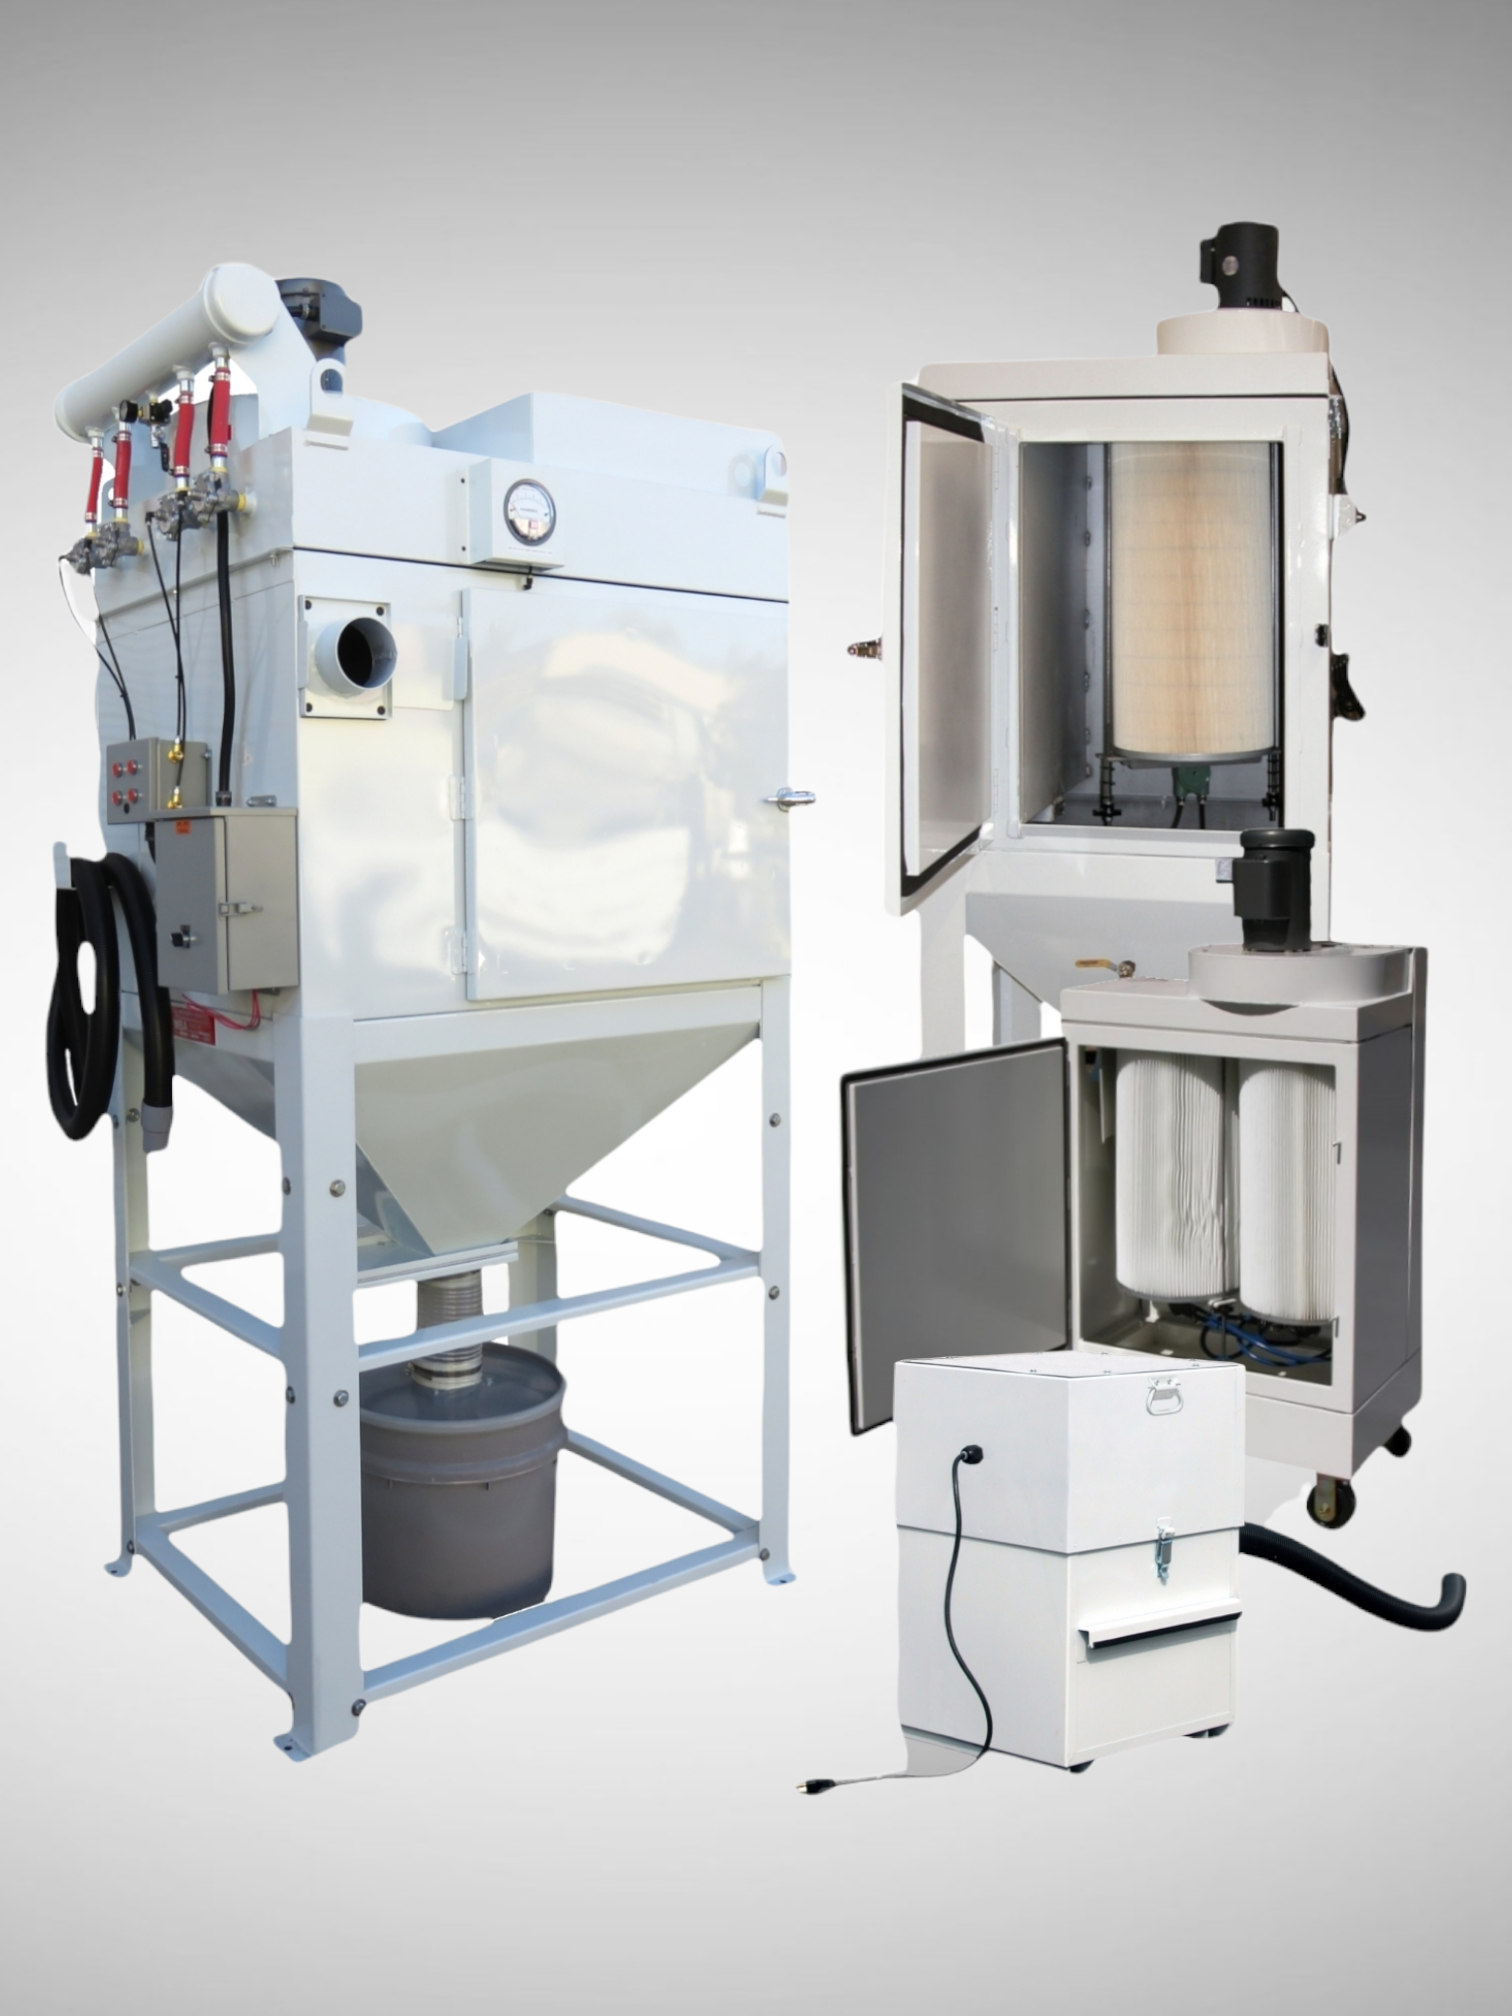 Dust Collectors & Support Products for Media Blast Cabinets